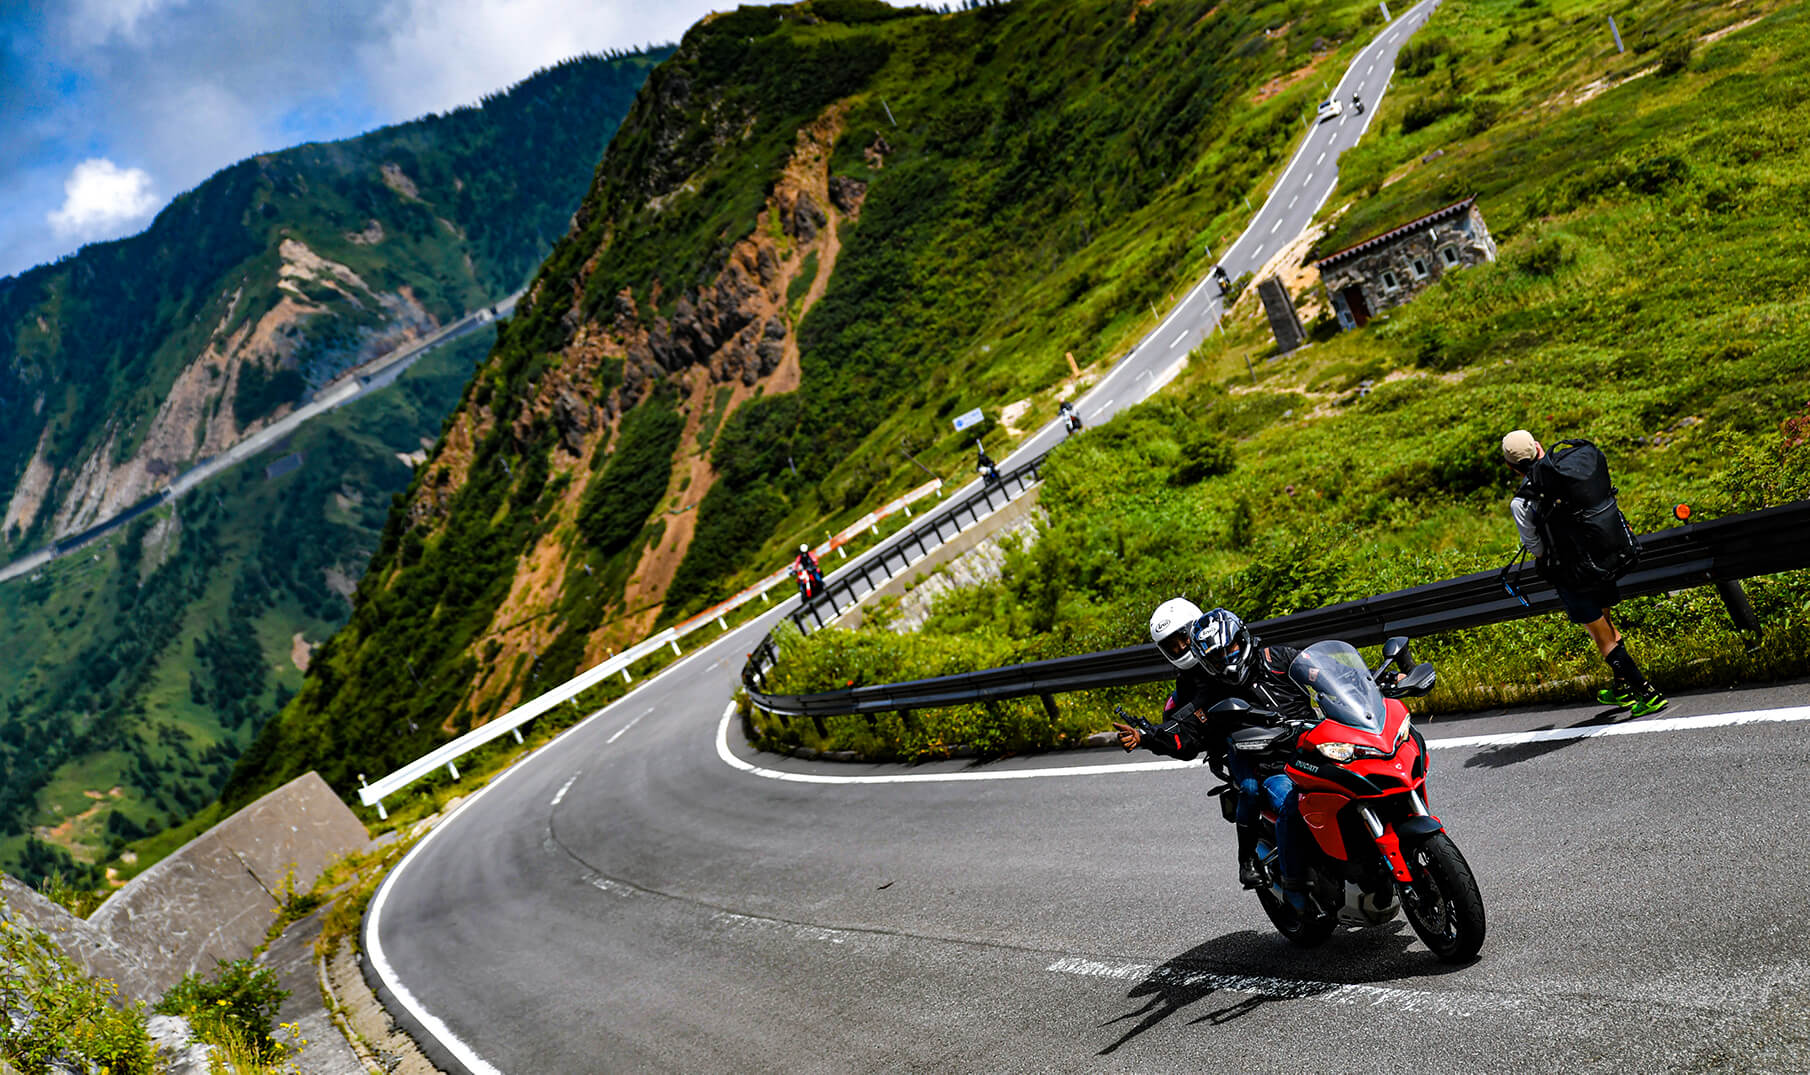 Self Tours|Moto Tours Japan – Experience the best motorcycle tours in Japan